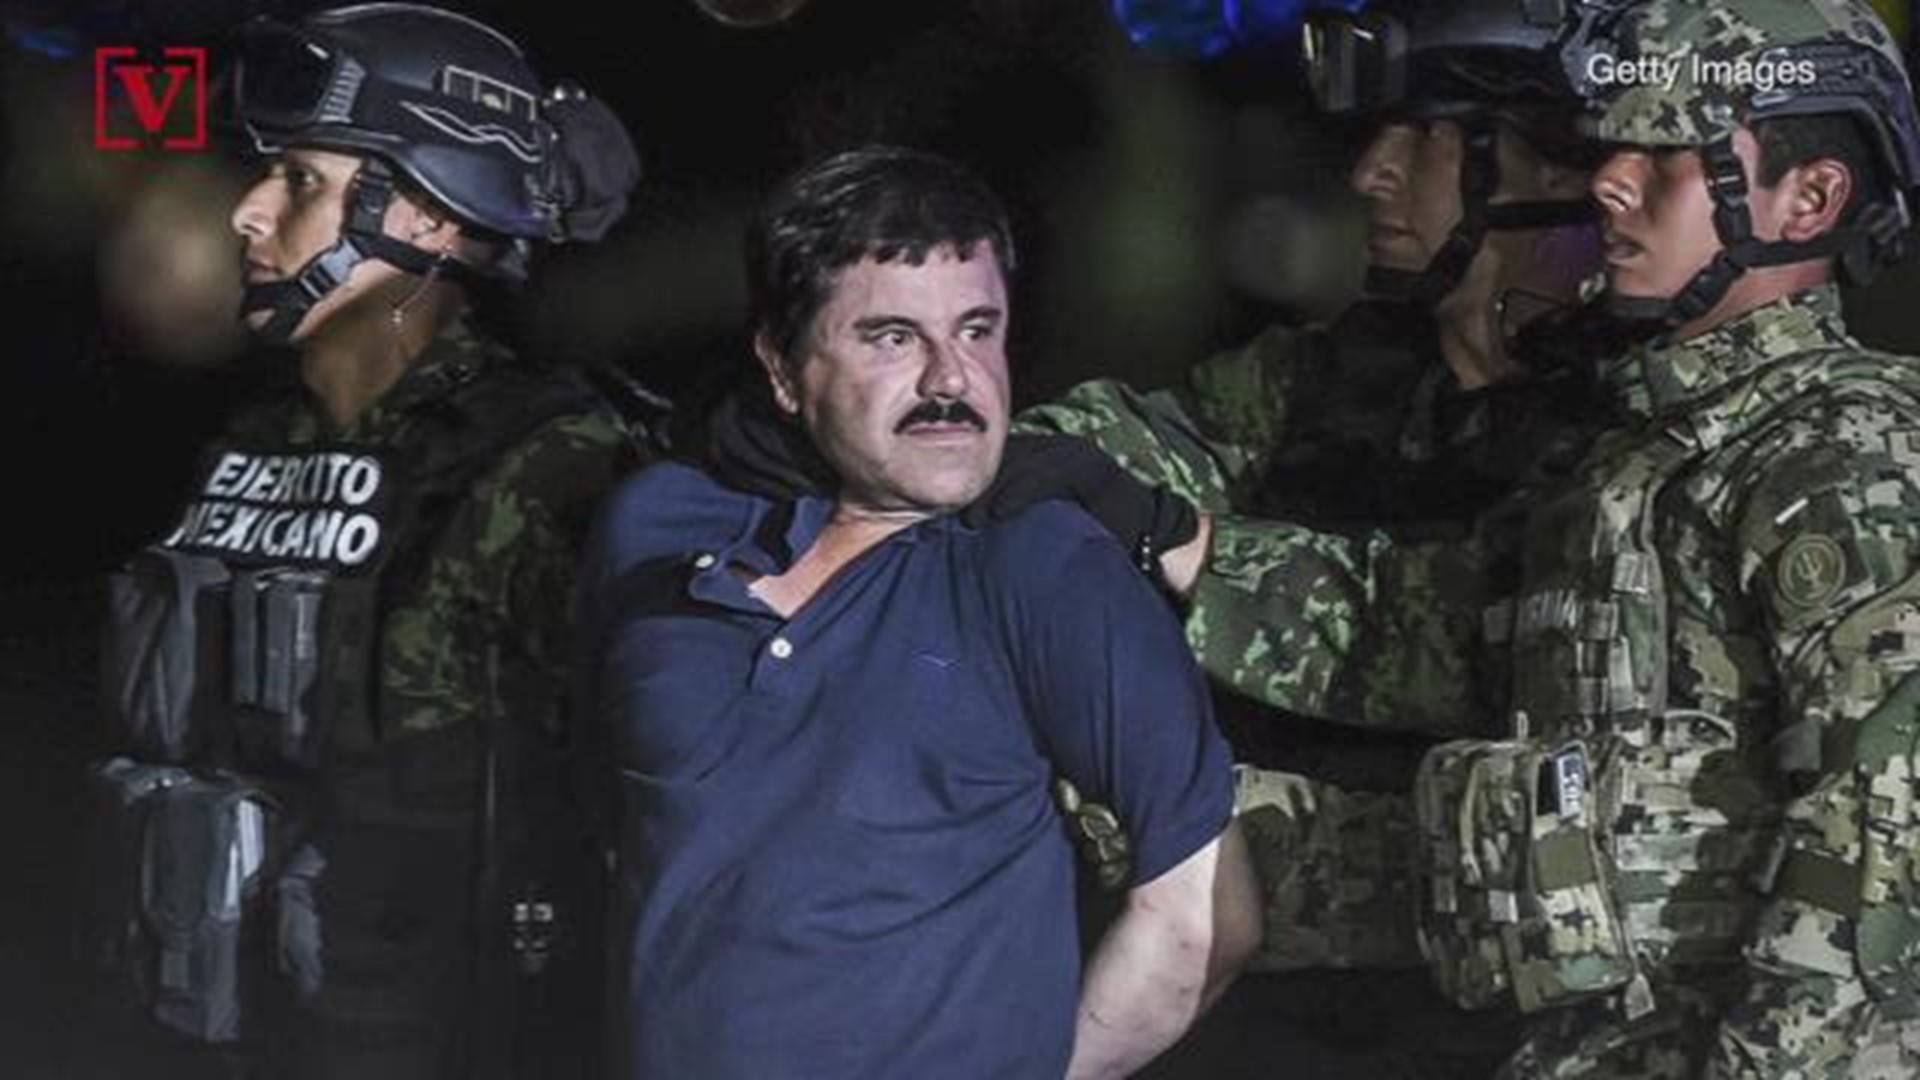 Senator Ted Cruz wants drug lord Joaquin Guzman, more commonly known as, El Chapo, to pay for the border wall. Veuer's Sam Berman has the full story.